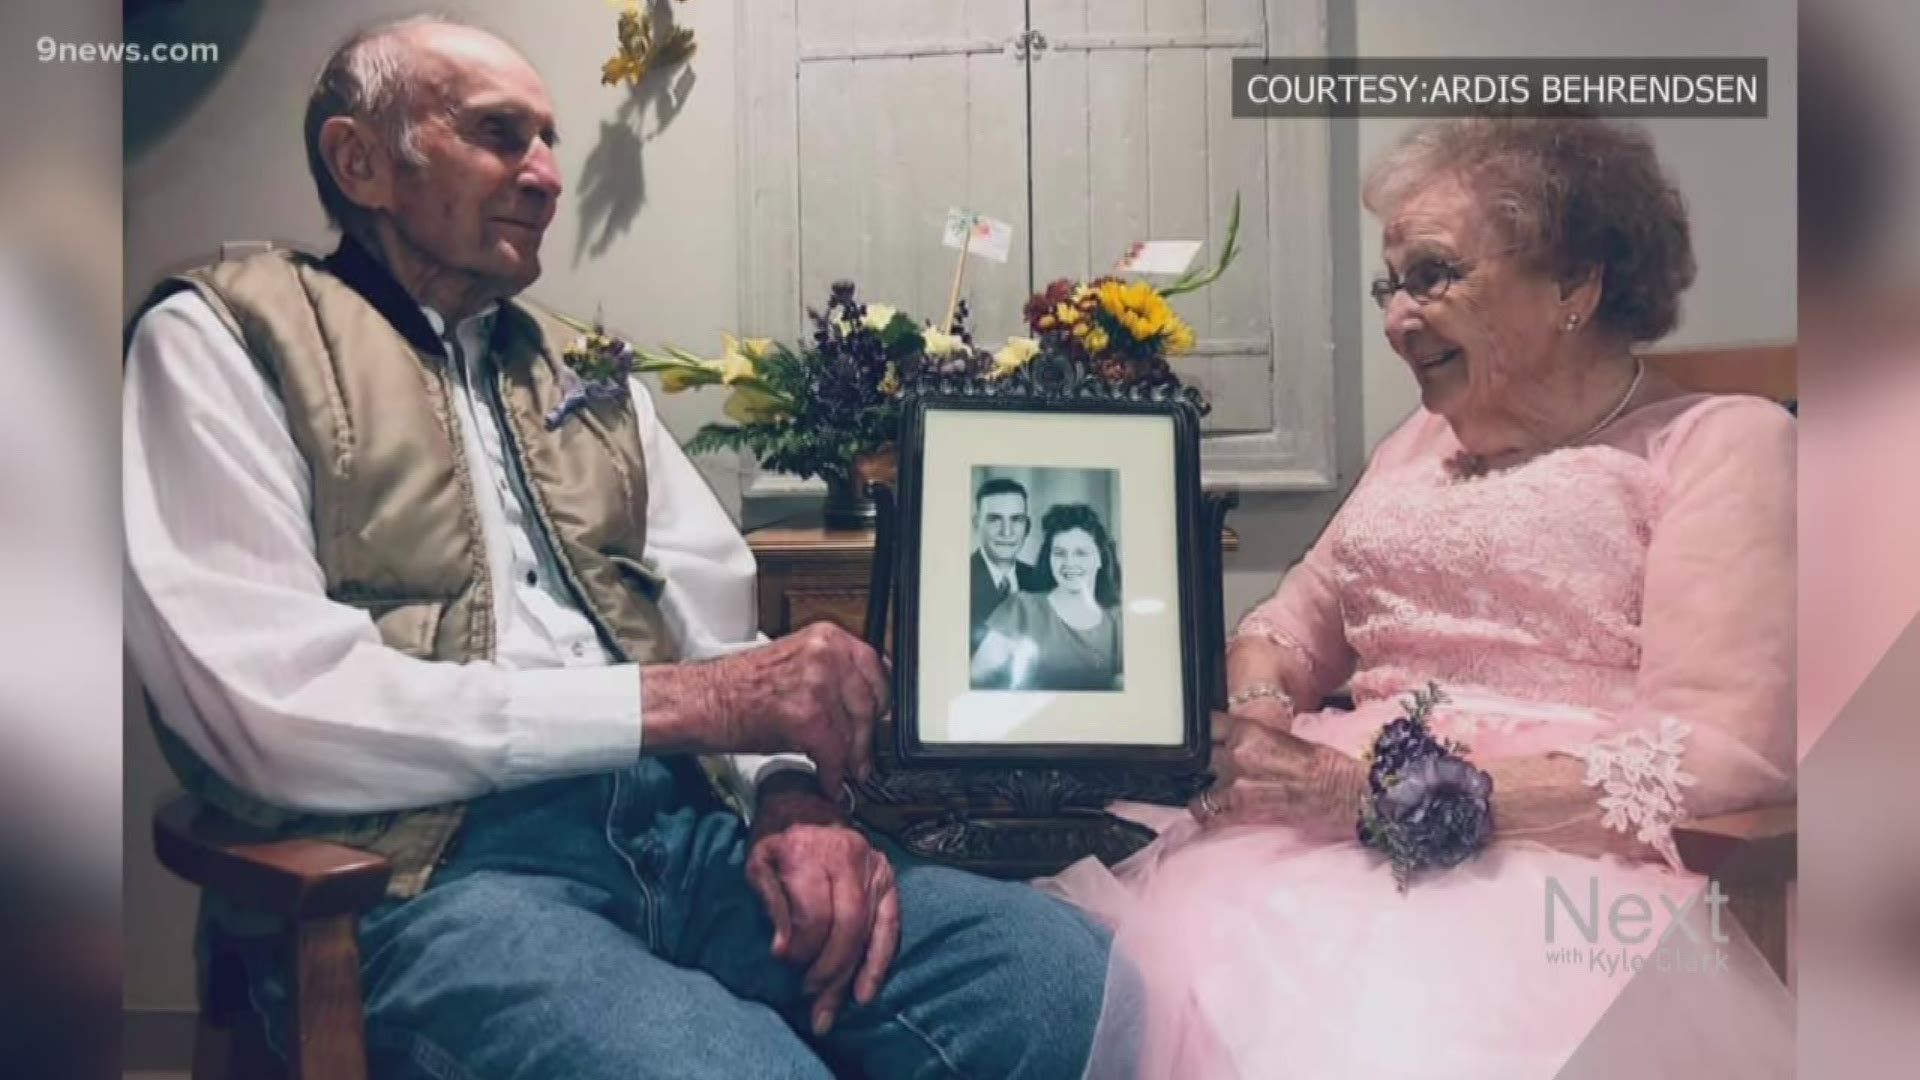 Shirley doesn't remember everything every day. She's 91 and fighting dementia. But she remembered Leonard and the love they've shared for 72 years.